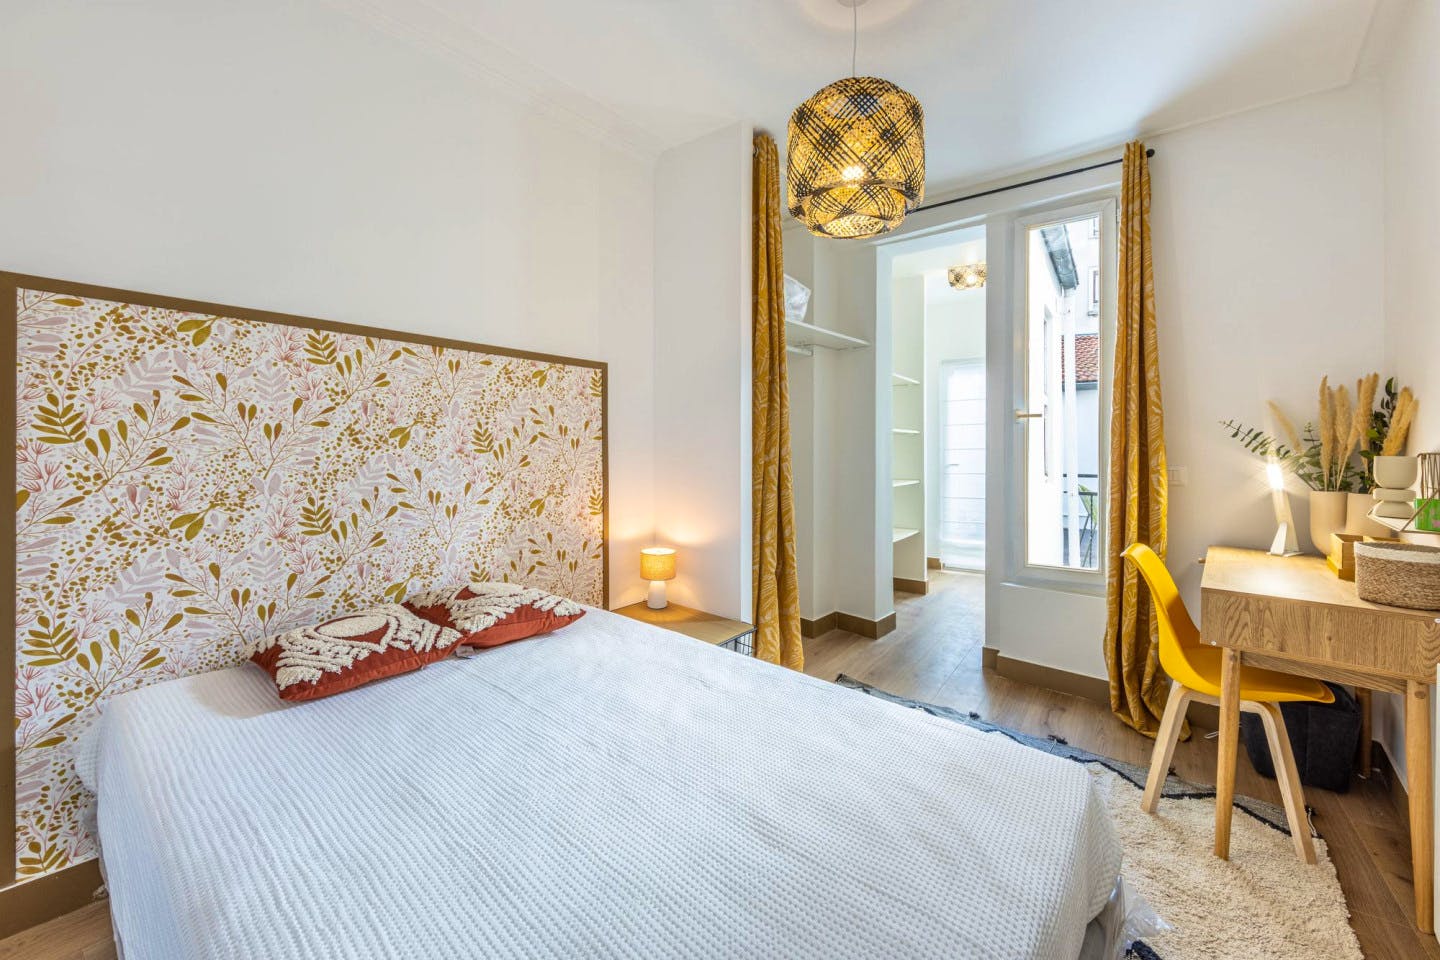 Exquisite home nestled in the vibrant 20th Arrondissement